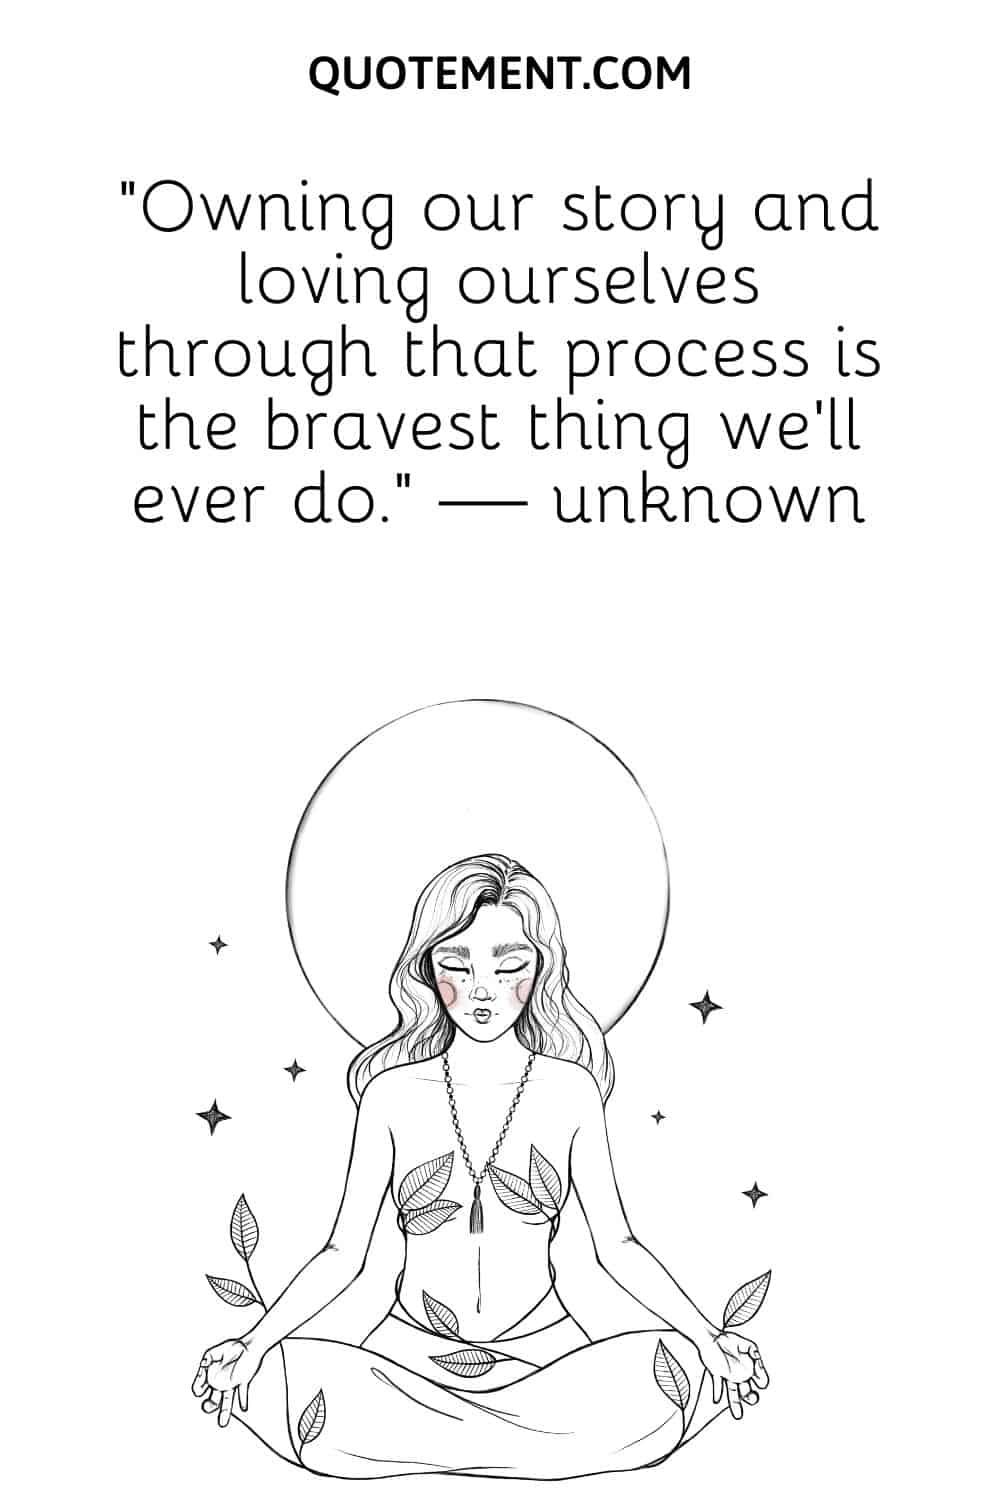 Owning our story and loving ourselves through that process is the bravest thing we’ll ever do